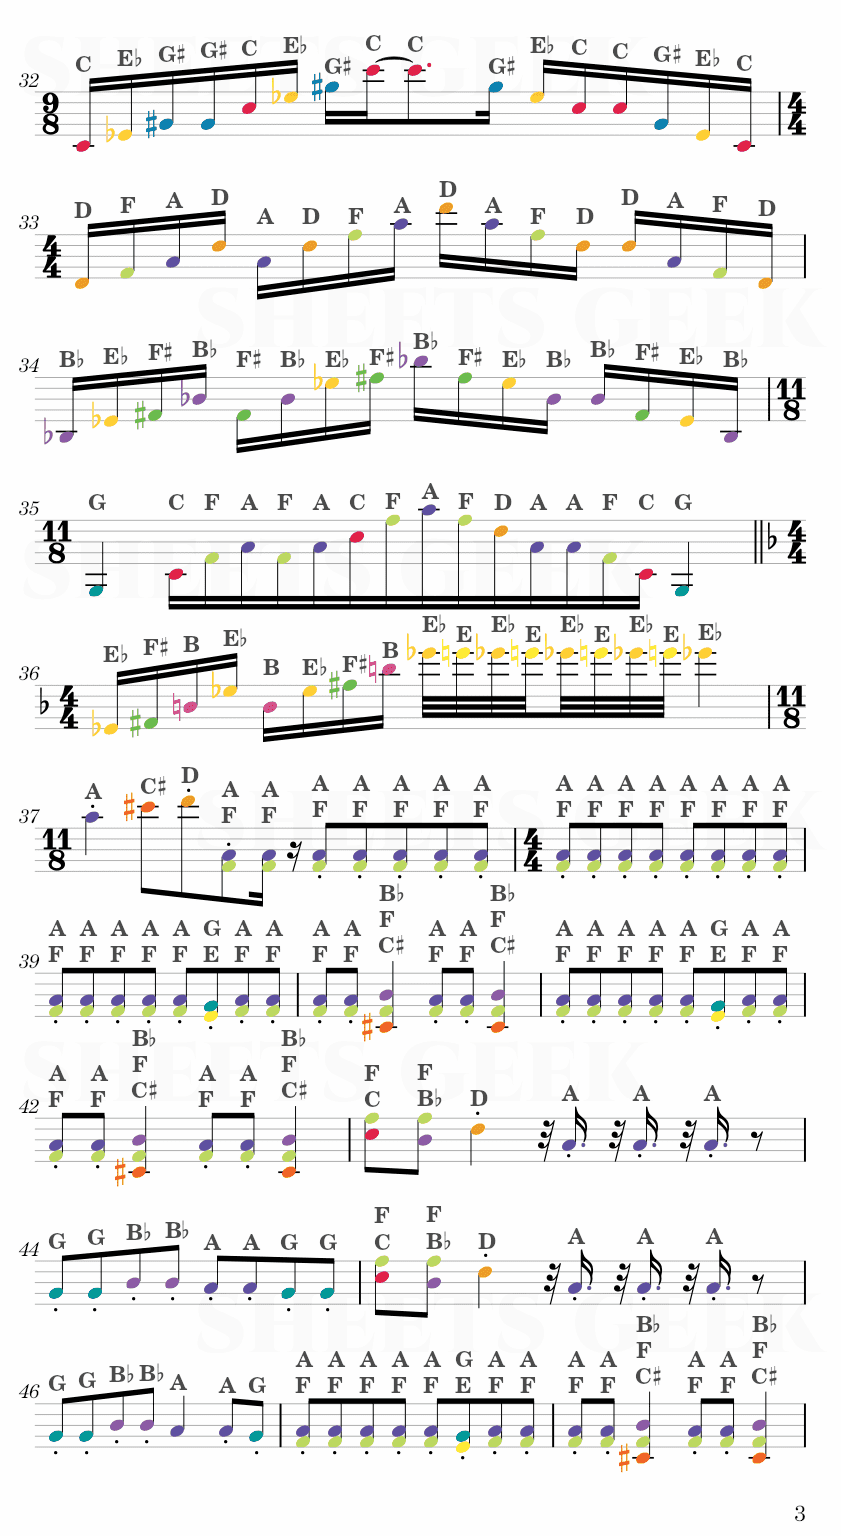 One Winged Angel - Final Fantasy VII Easy Sheet Music Free for piano, keyboard, flute, violin, sax, cello page 3